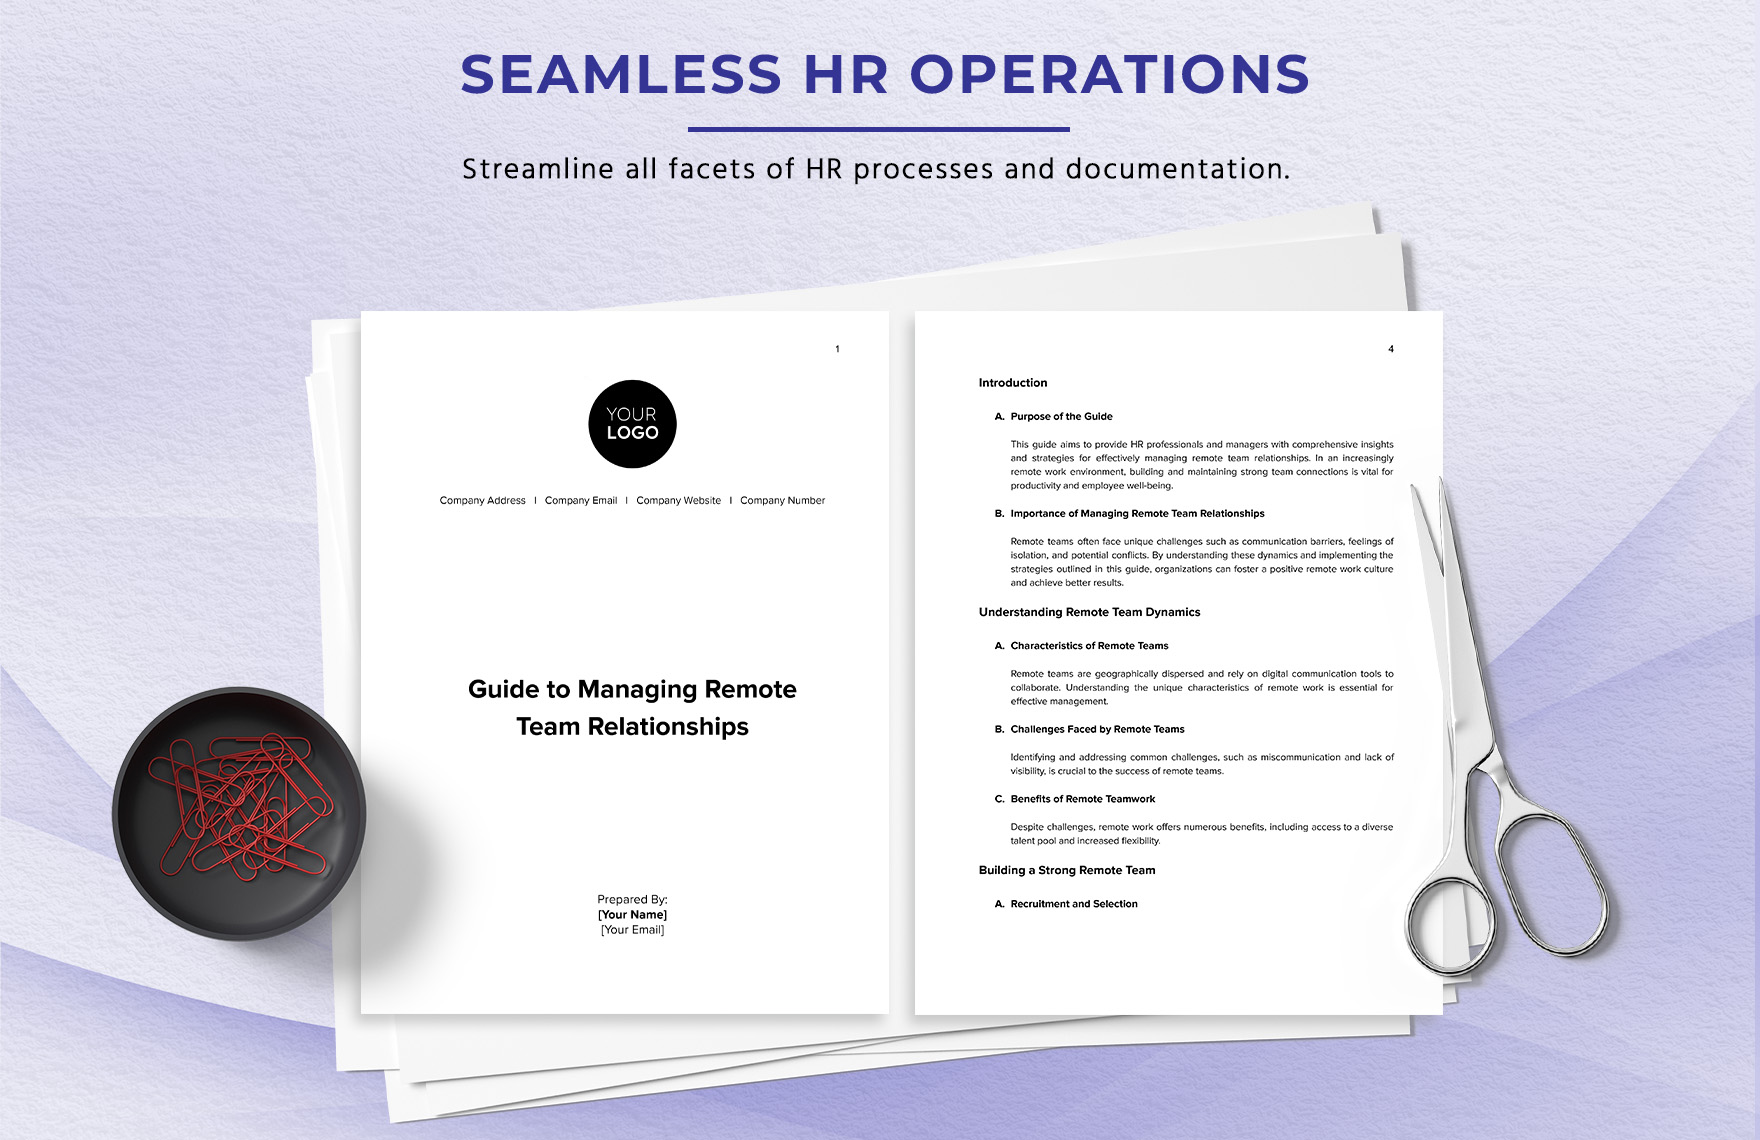 Guide to Managing Remote Team Relationships HR Template